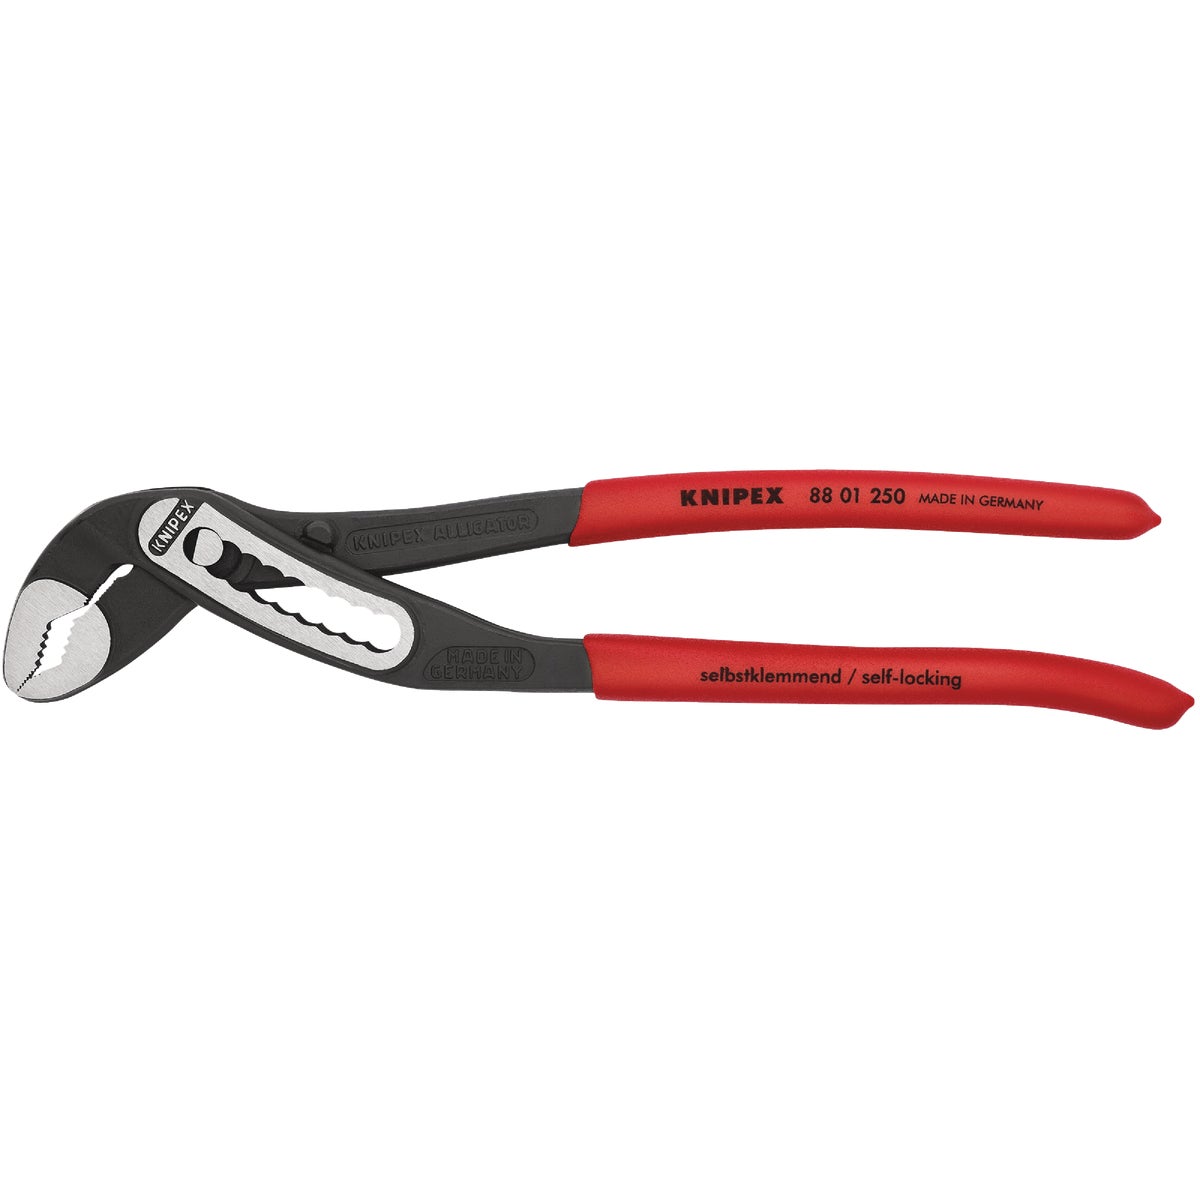 Knipex Alligator 10 In. Water Pump Groove Joint Pliers